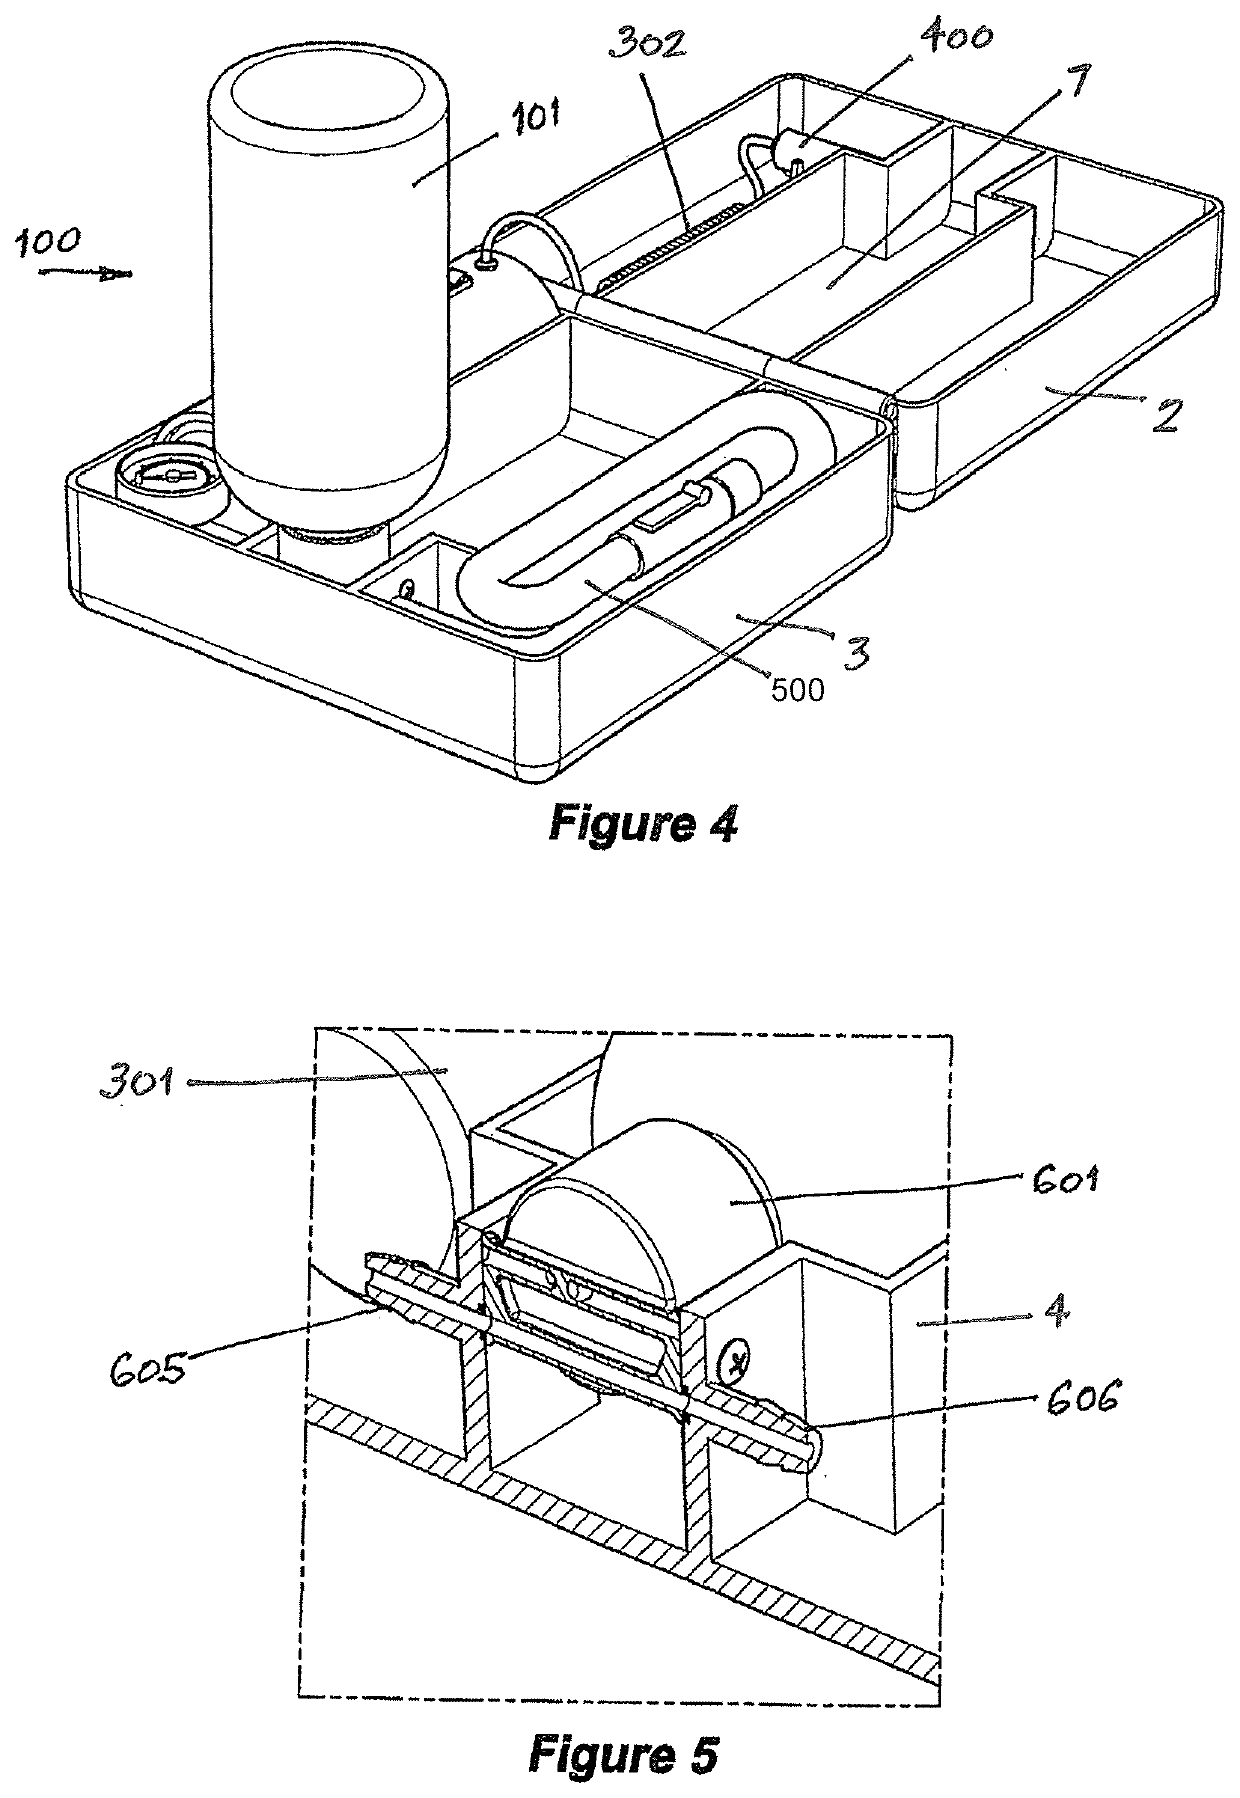 Improved apparatus for sealing and inflation of damaged inflatable articles, such as punctured tires